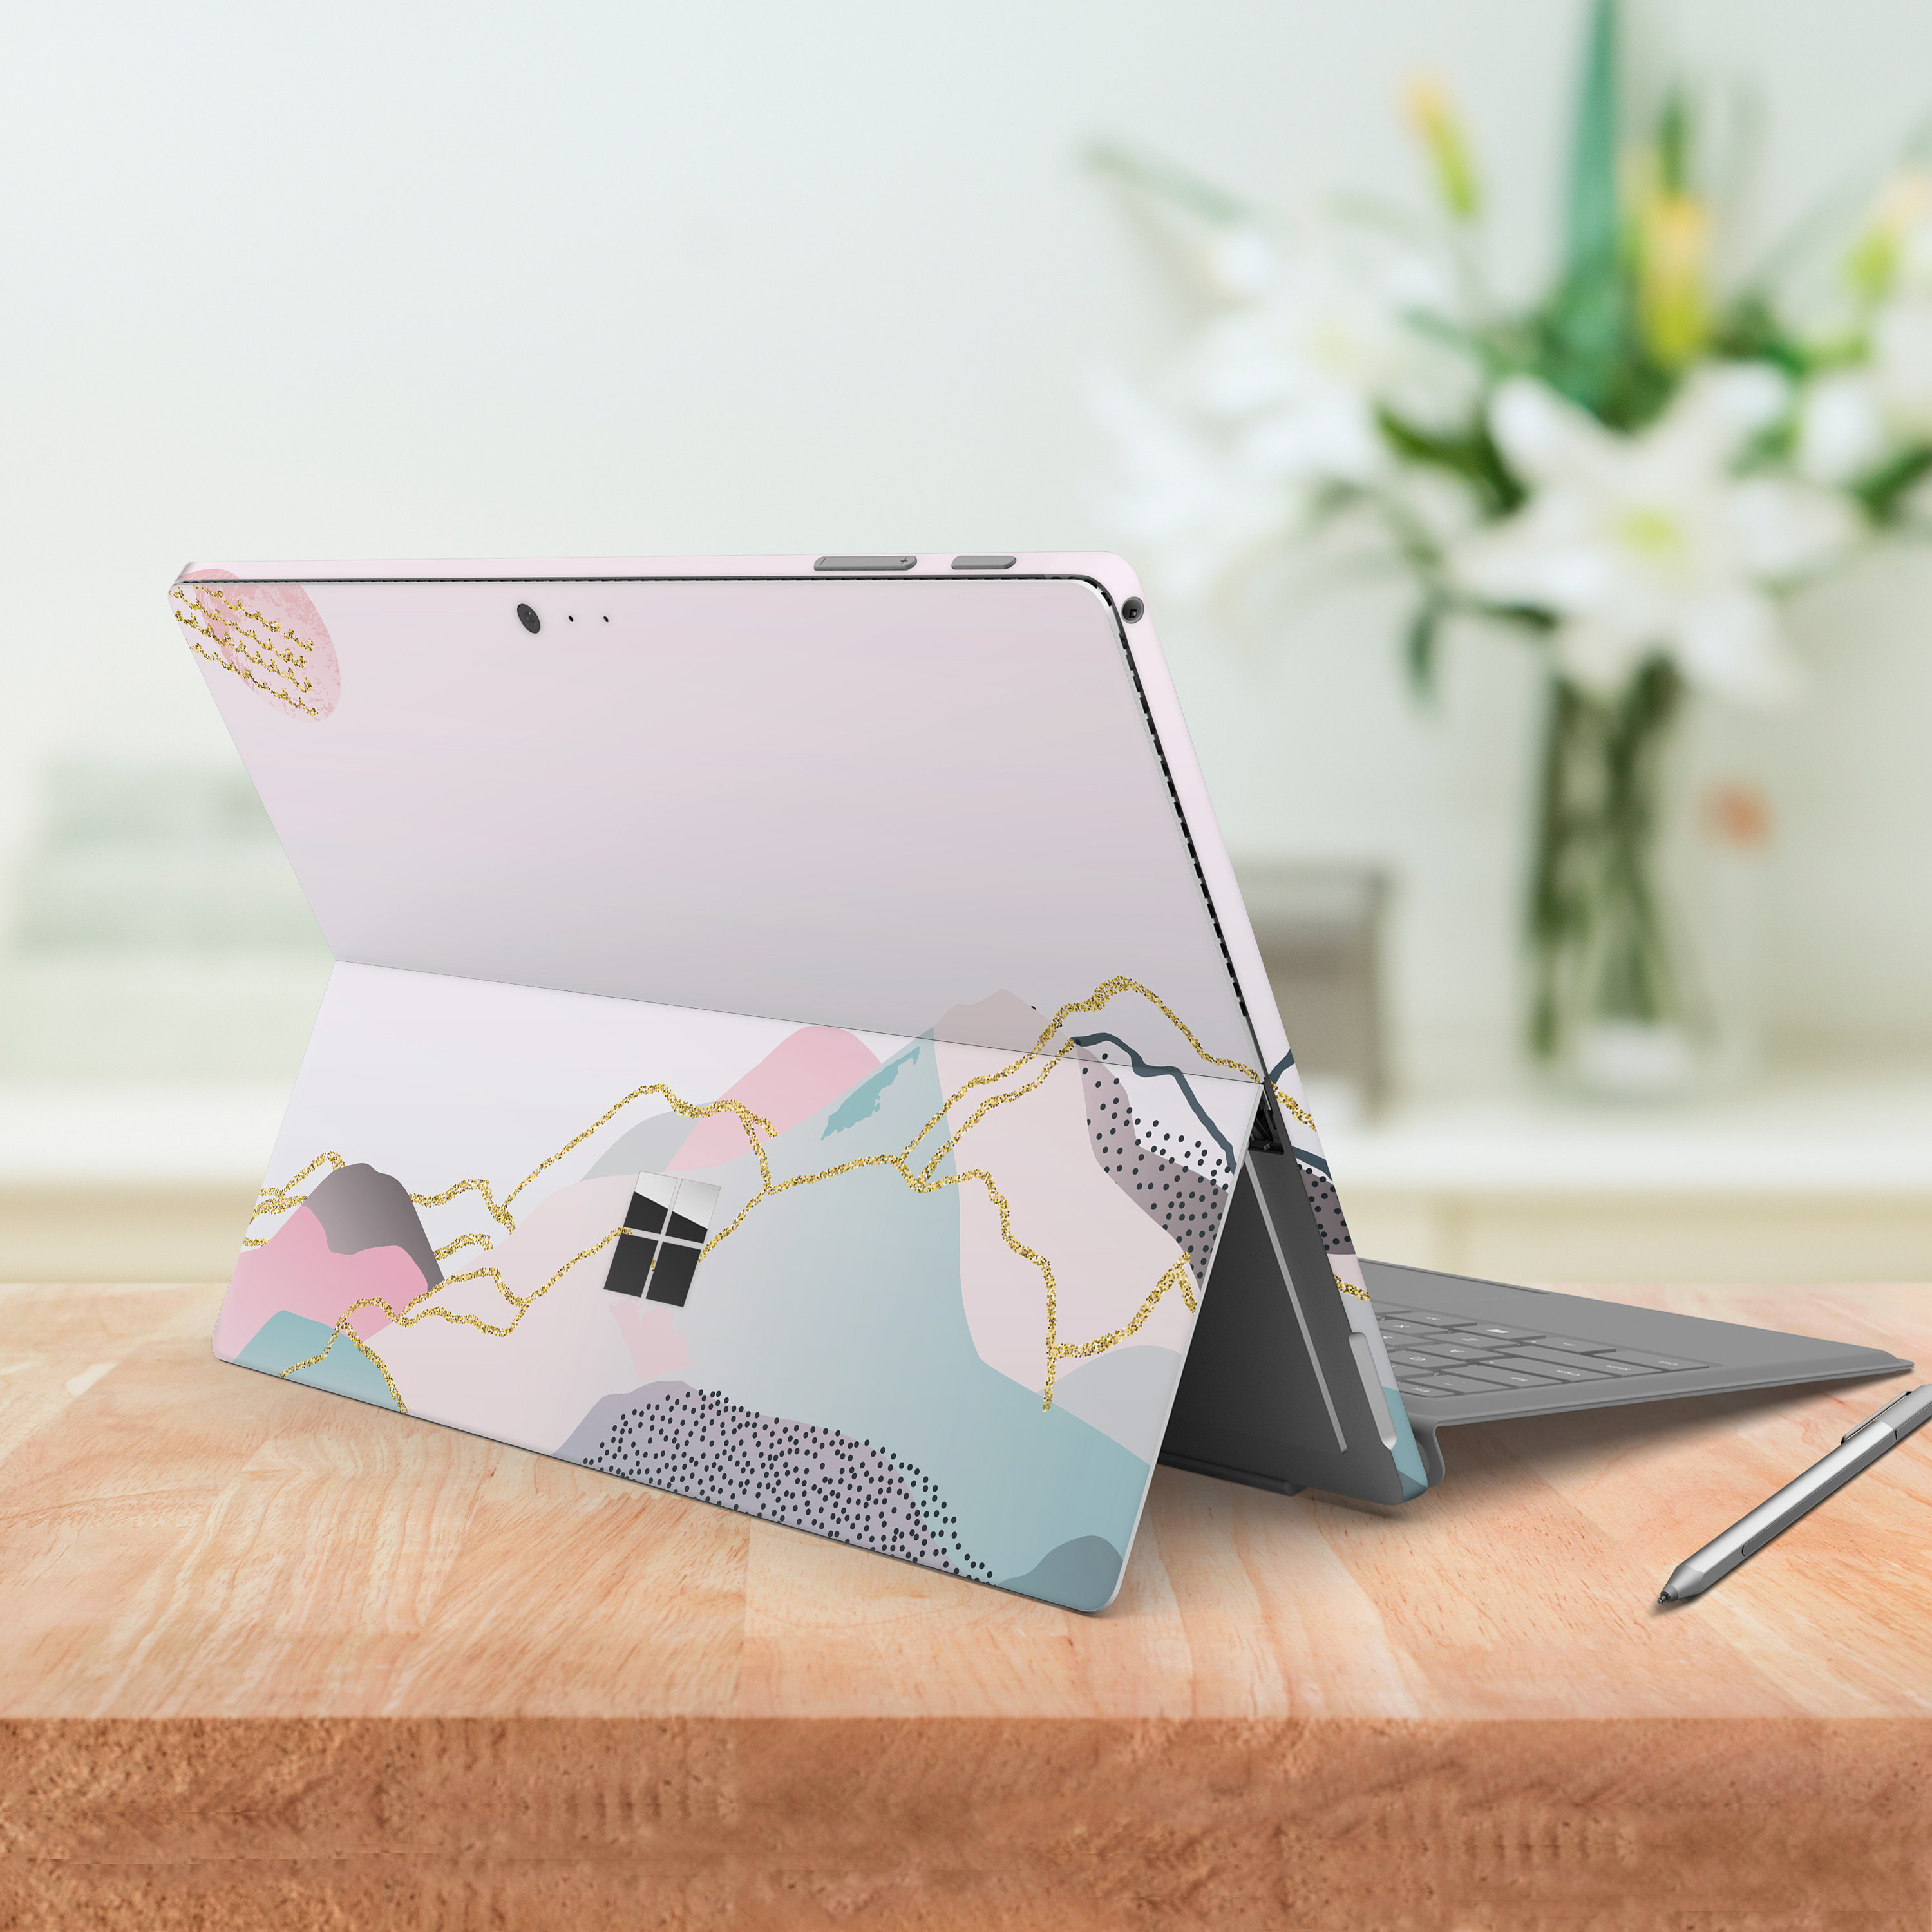 DecalGirl Mslg-ss-pnk Microsoft Surface Laptop Go Skin - Solid State Pink (Skin Only)